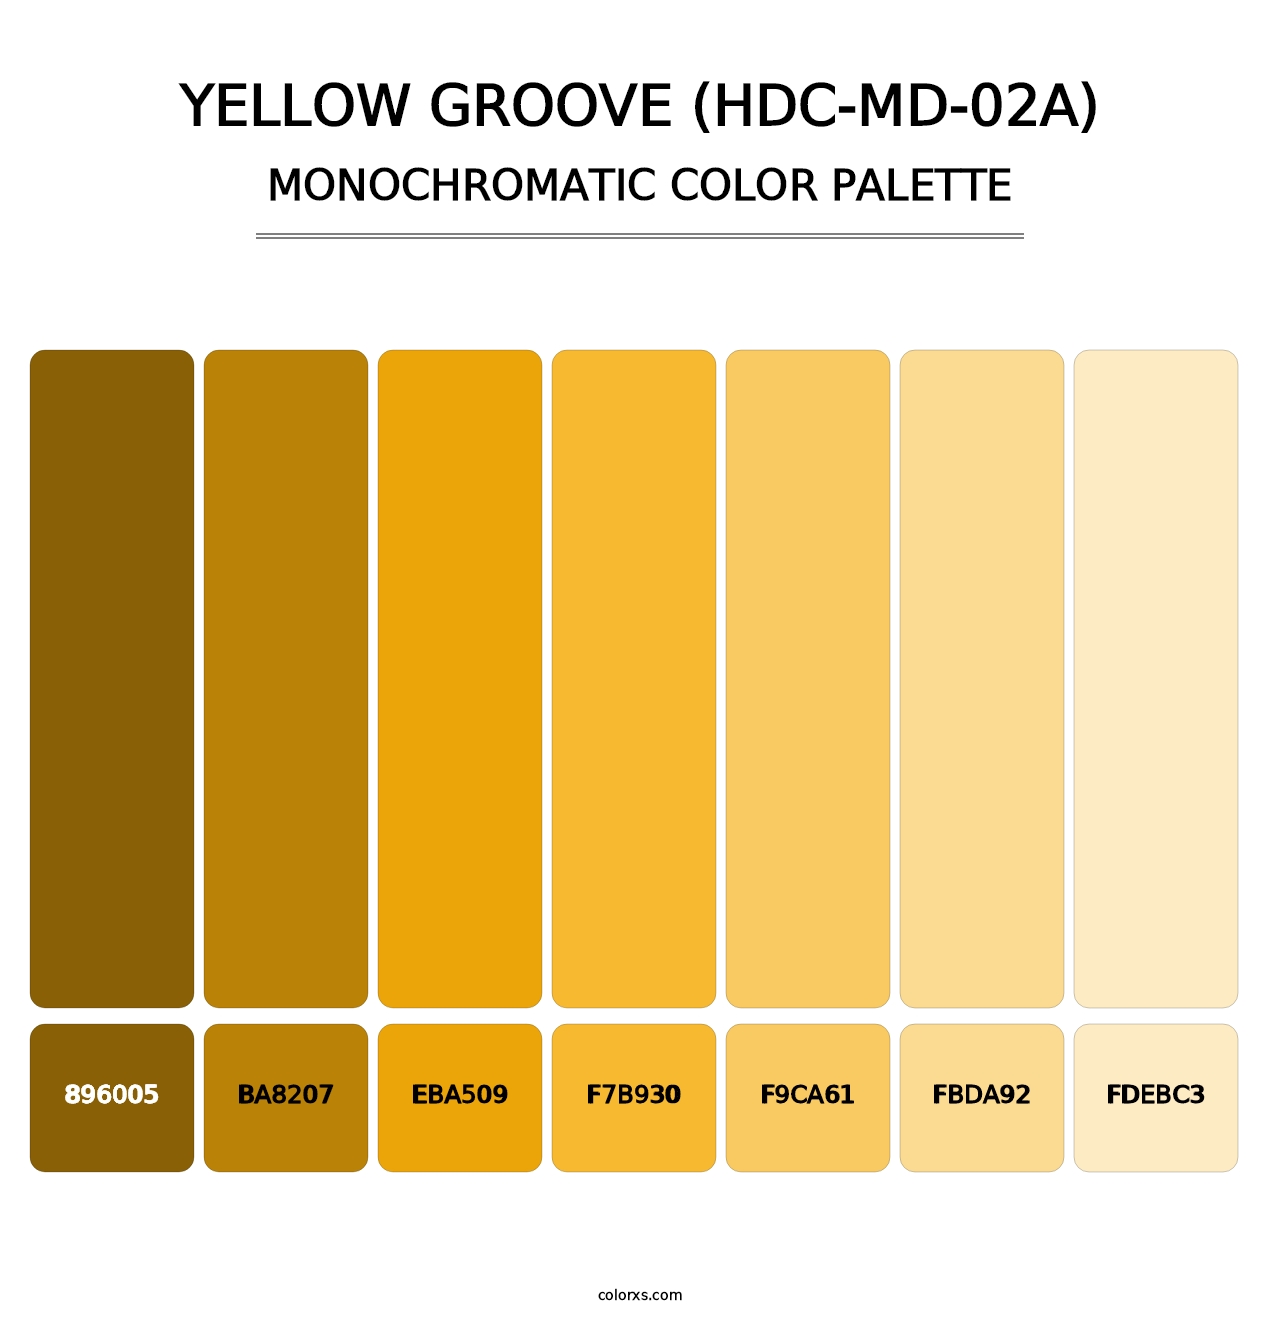 Yellow Groove (HDC-MD-02A) - Monochromatic Color Palette